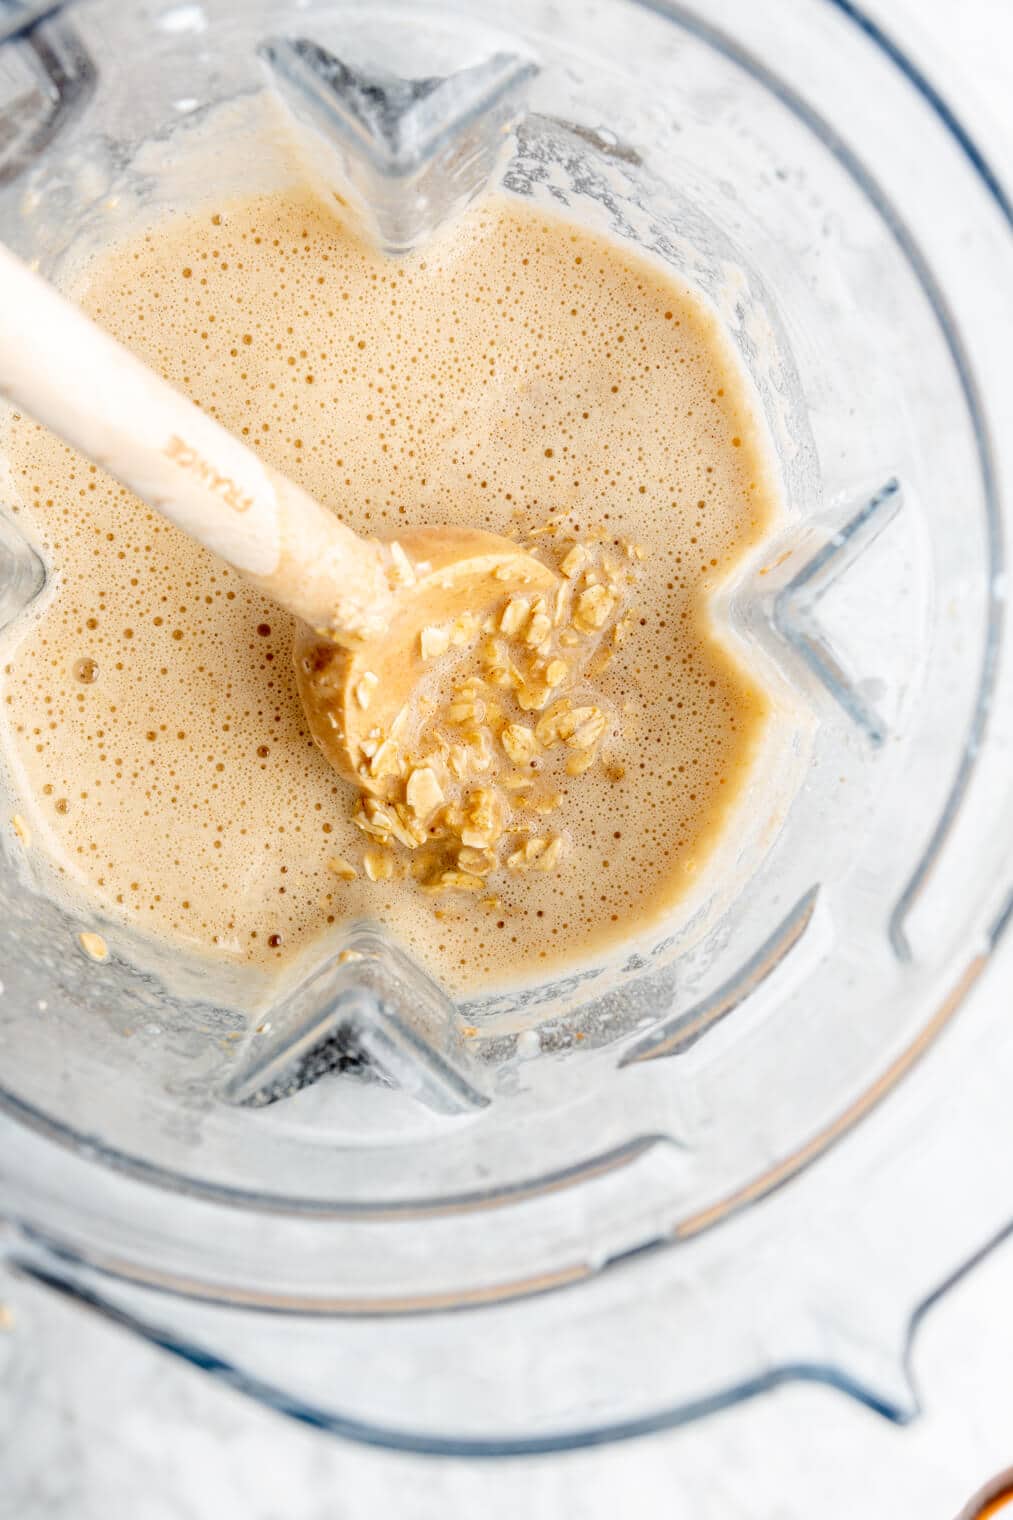 Spatula in a blender pitcher with soaked oats in a liquid mixture.